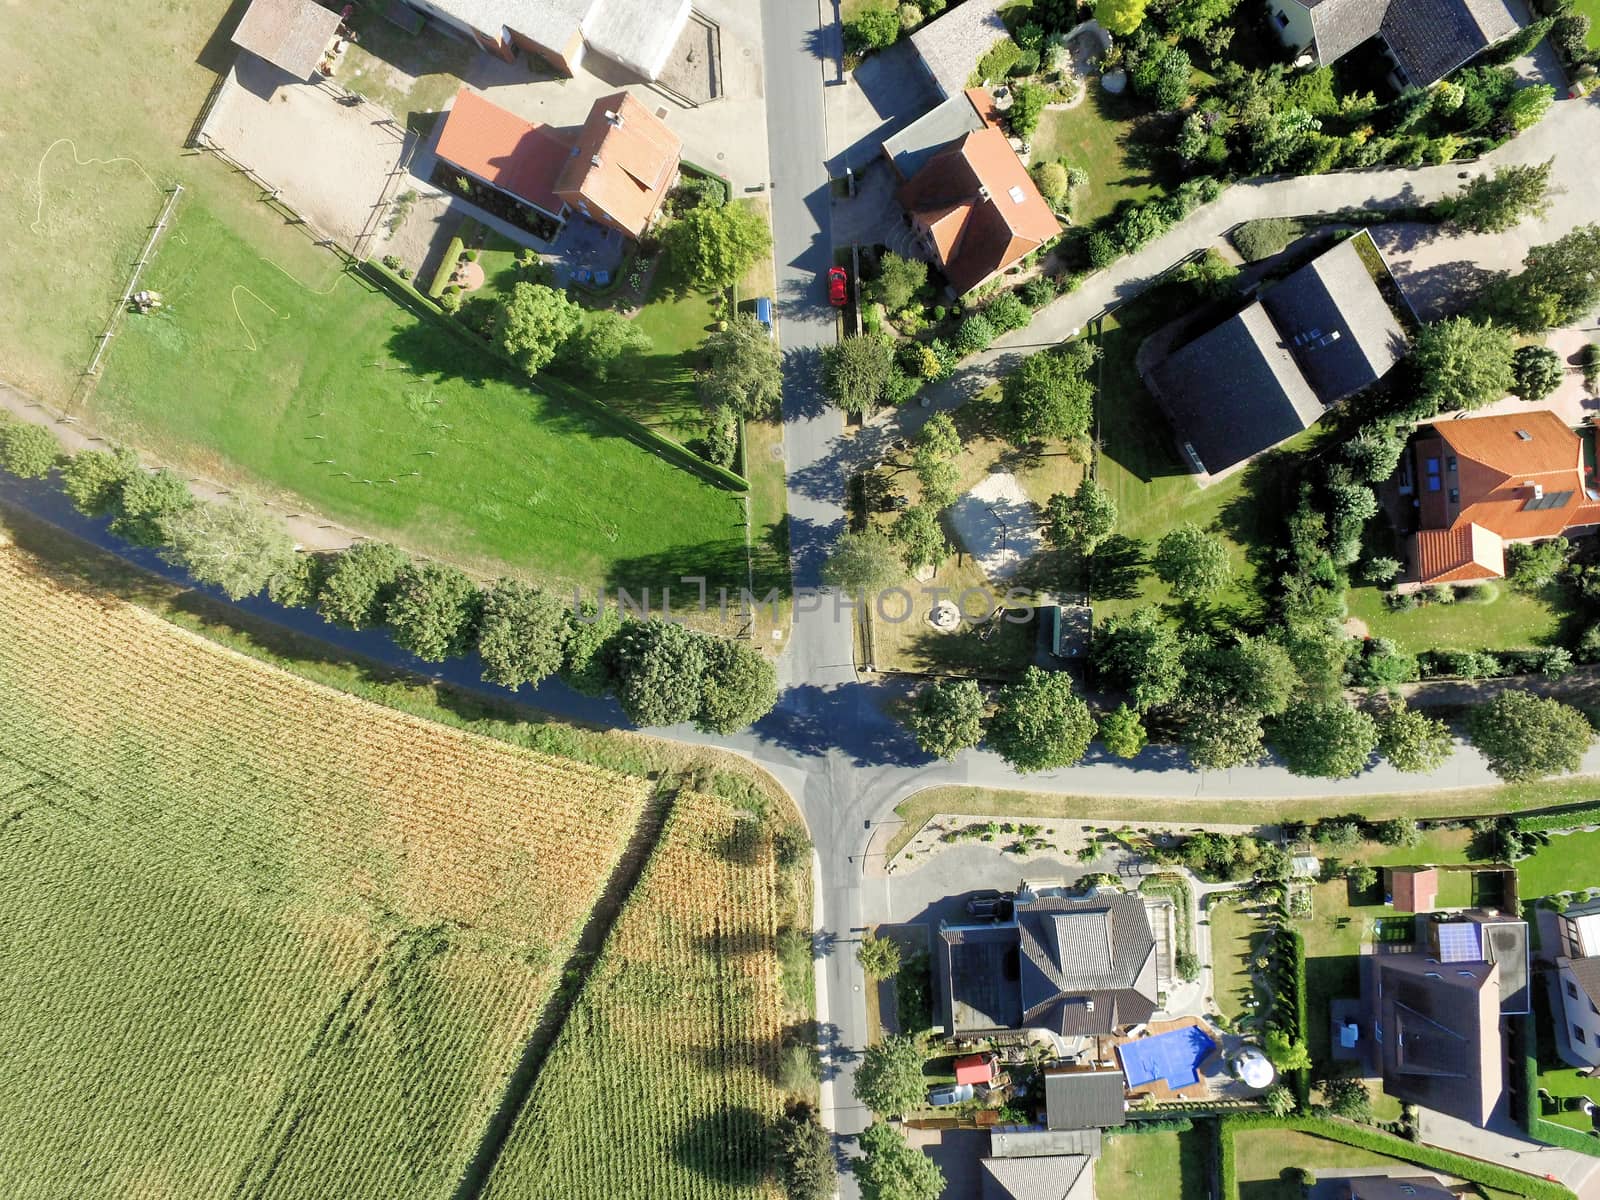 Aerial view from the edge of a village in Germany with a crossing and houses